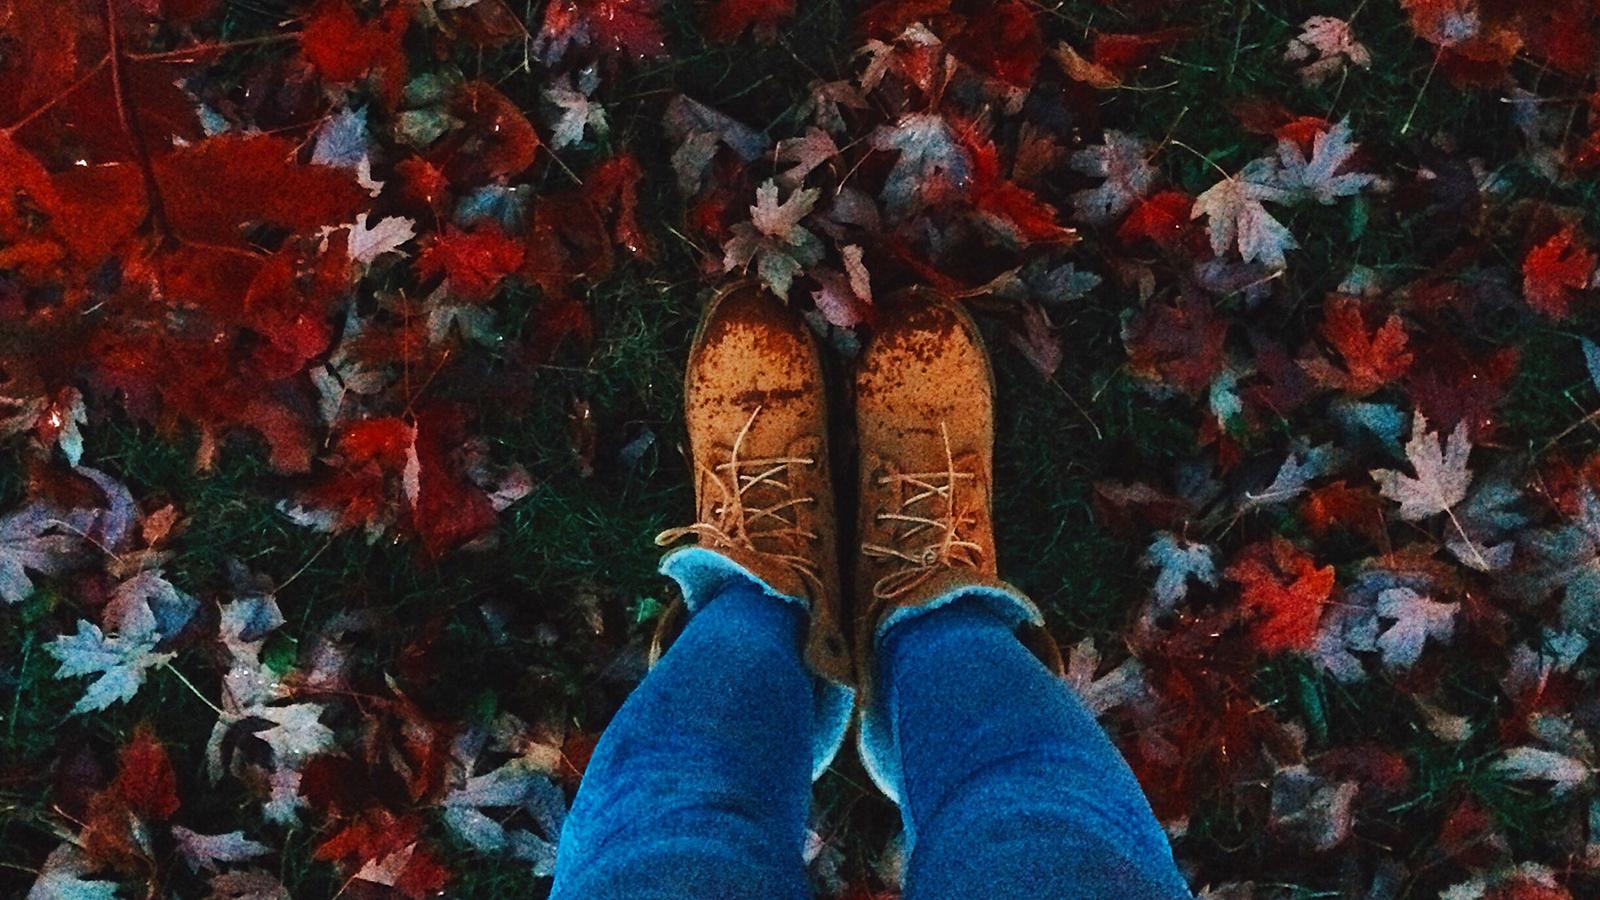 a person's legs and shoes standing on autumn leaves